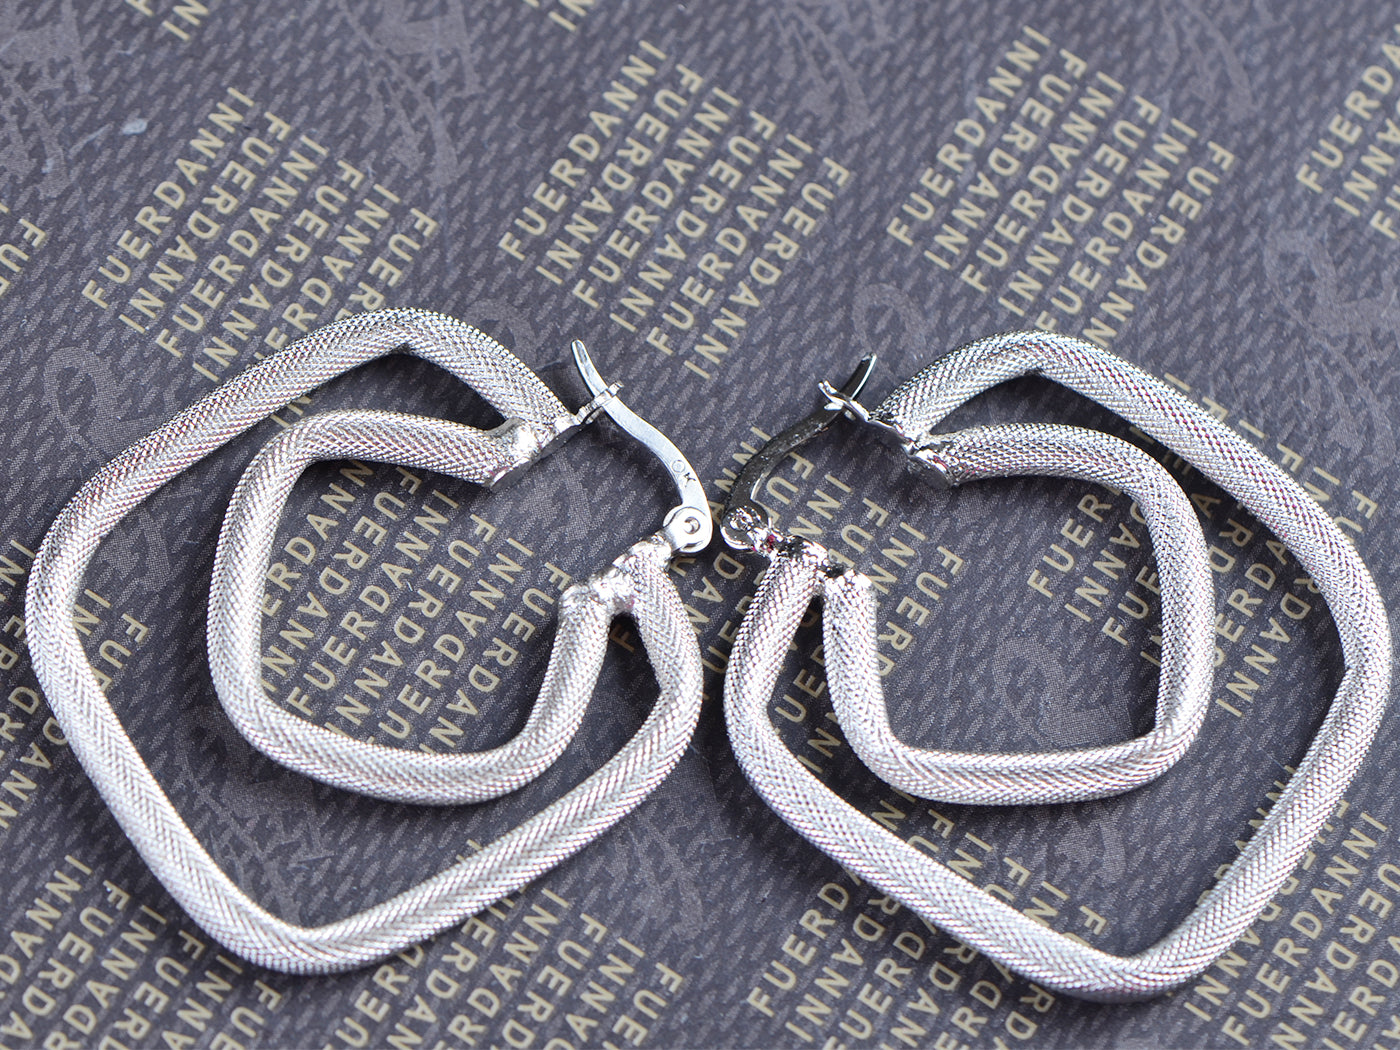 Silver Snake Scale Skin Twisting Infinity Necklace Pendant Earring Set